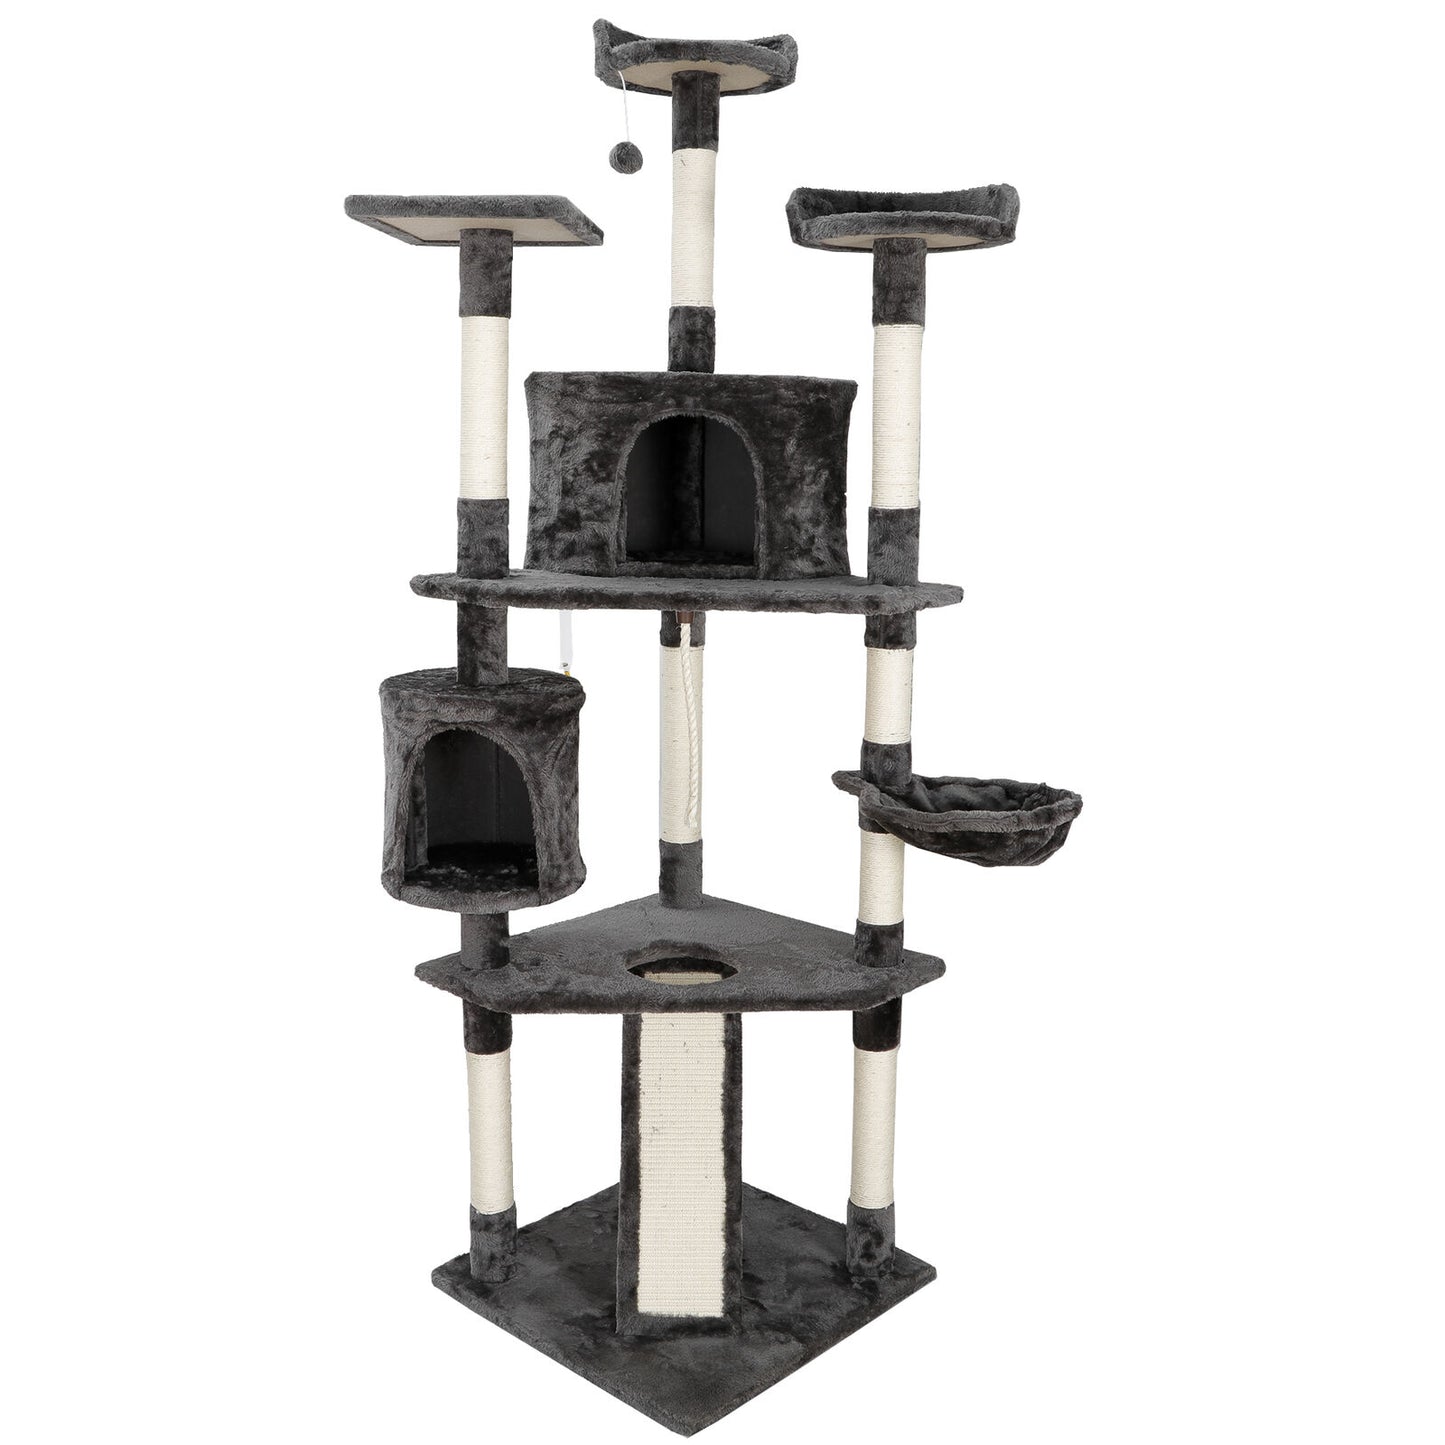 79" Cat Tree Activity Tower Pet Kitty Furniture with Scratching Posts Ladders